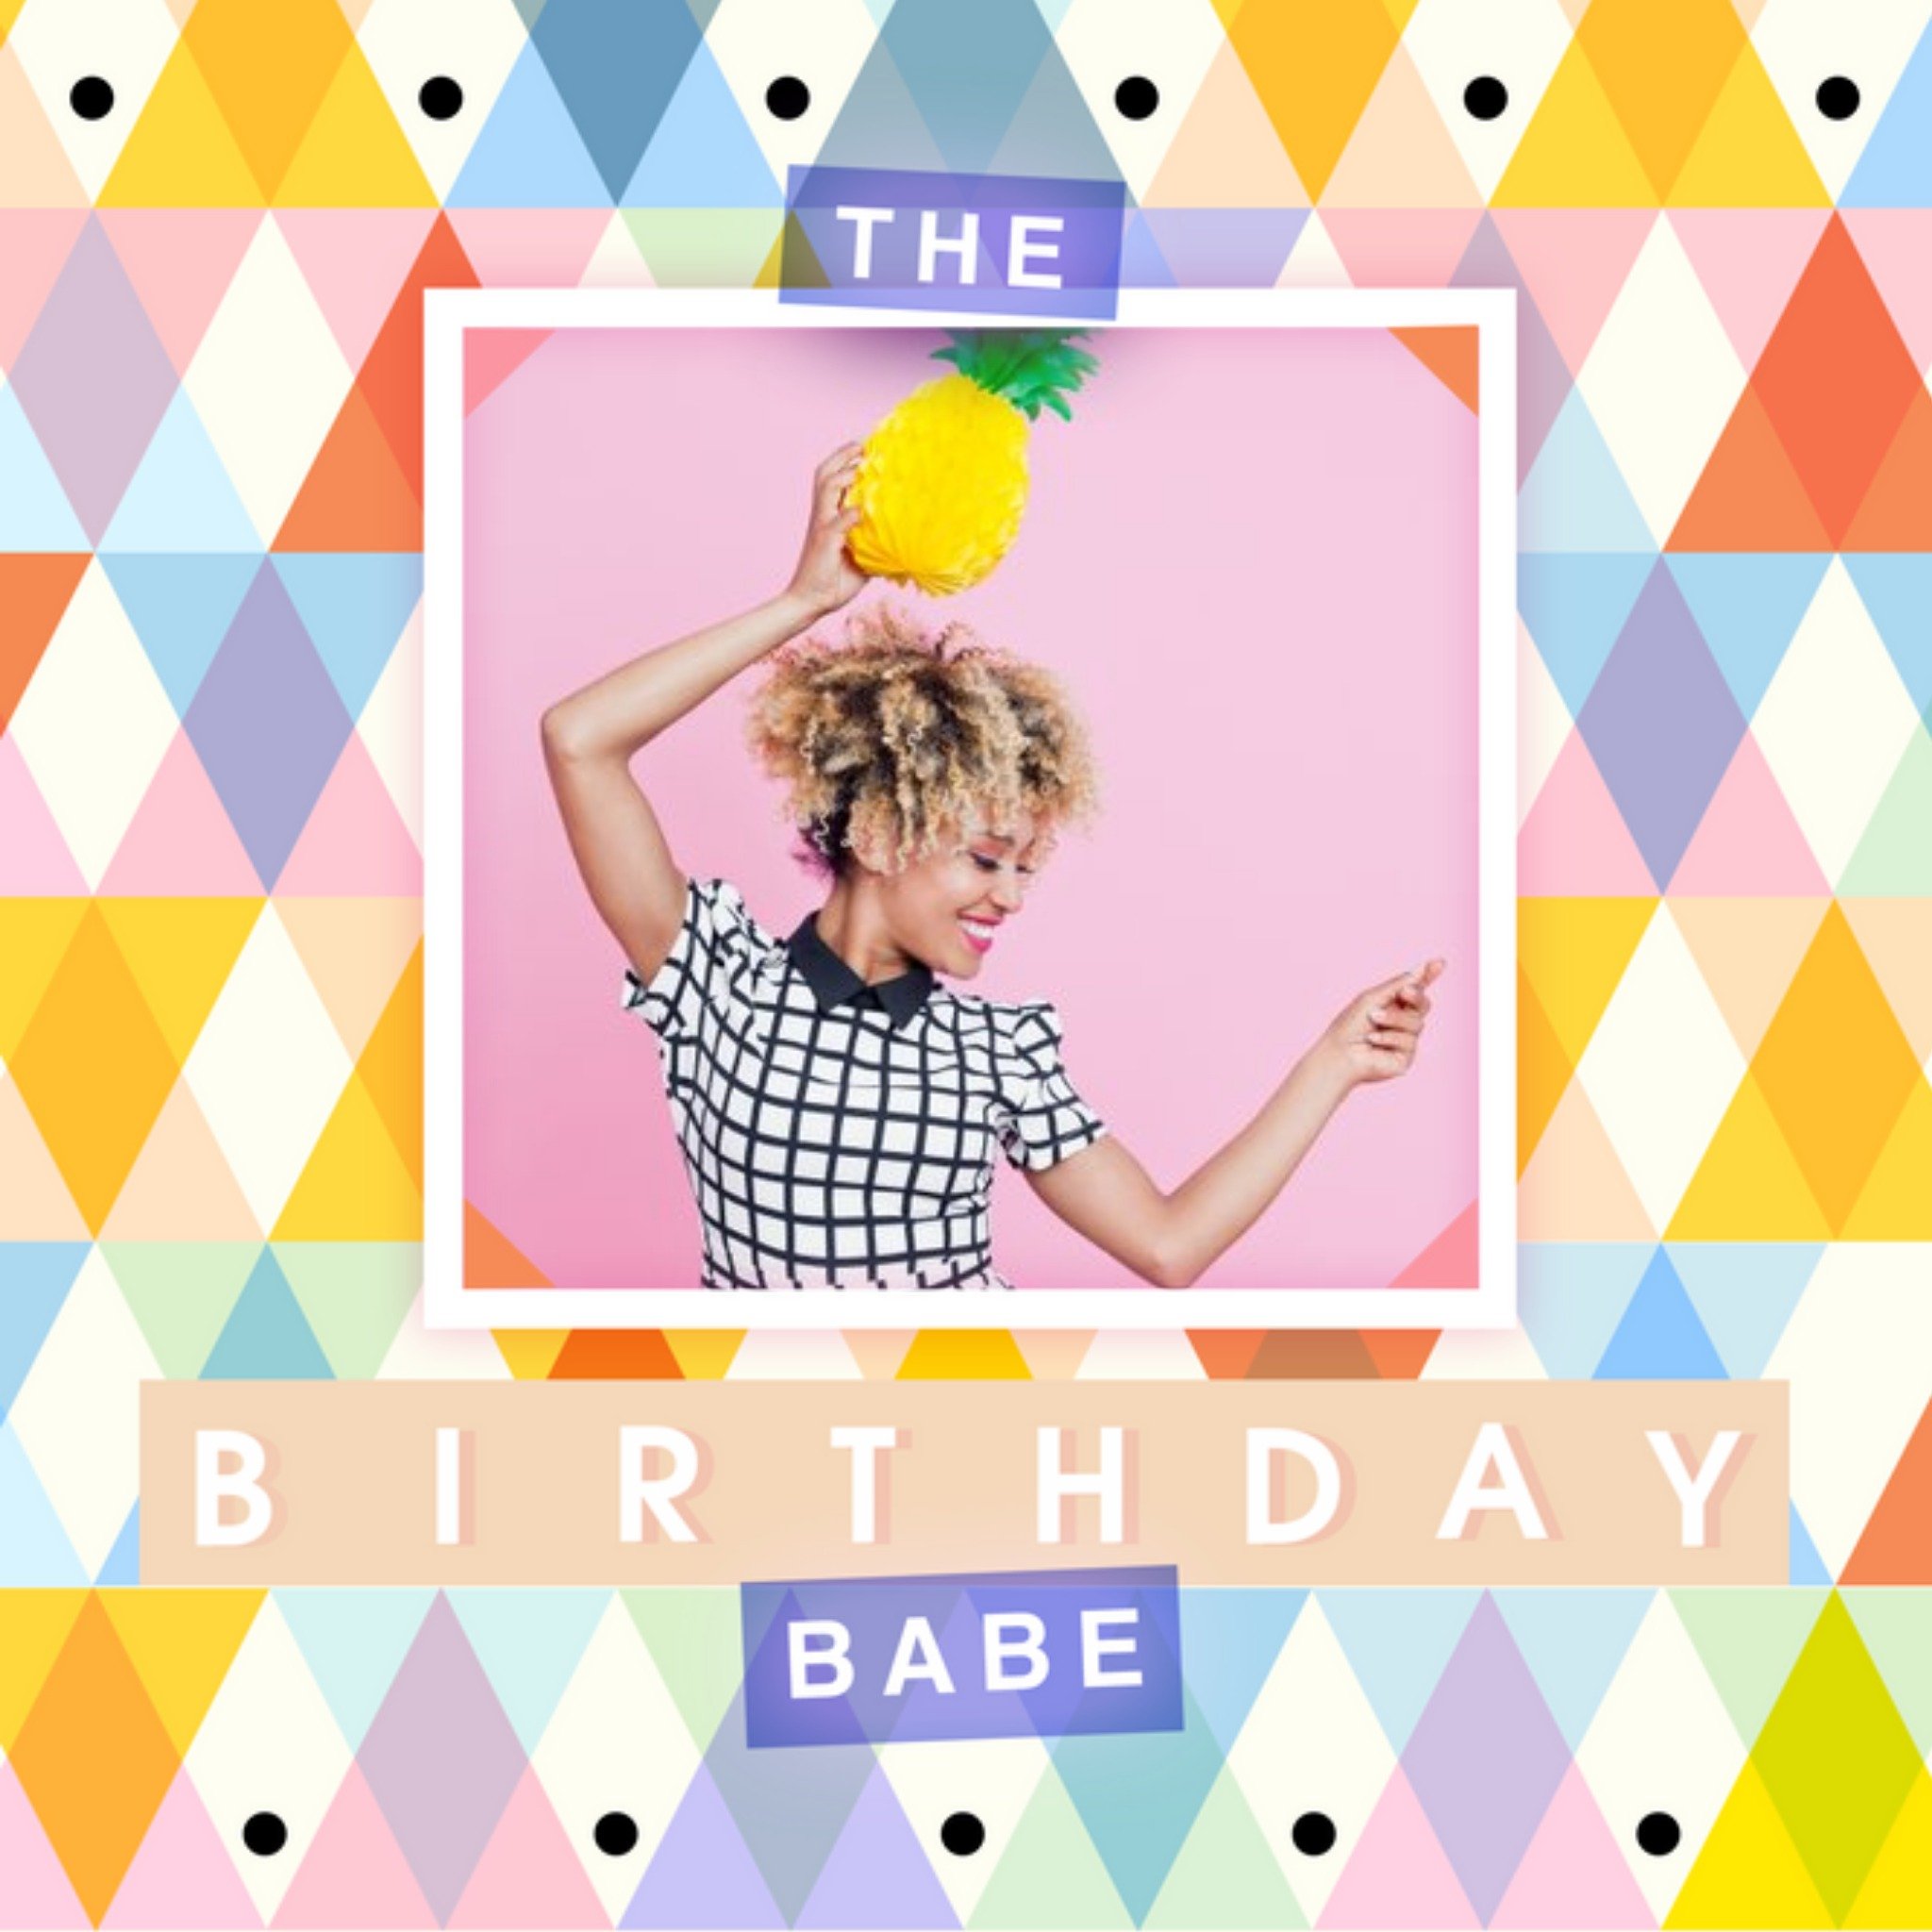 Moonpig Colourful And Geometric The Birthday Babe Photo Card, Square